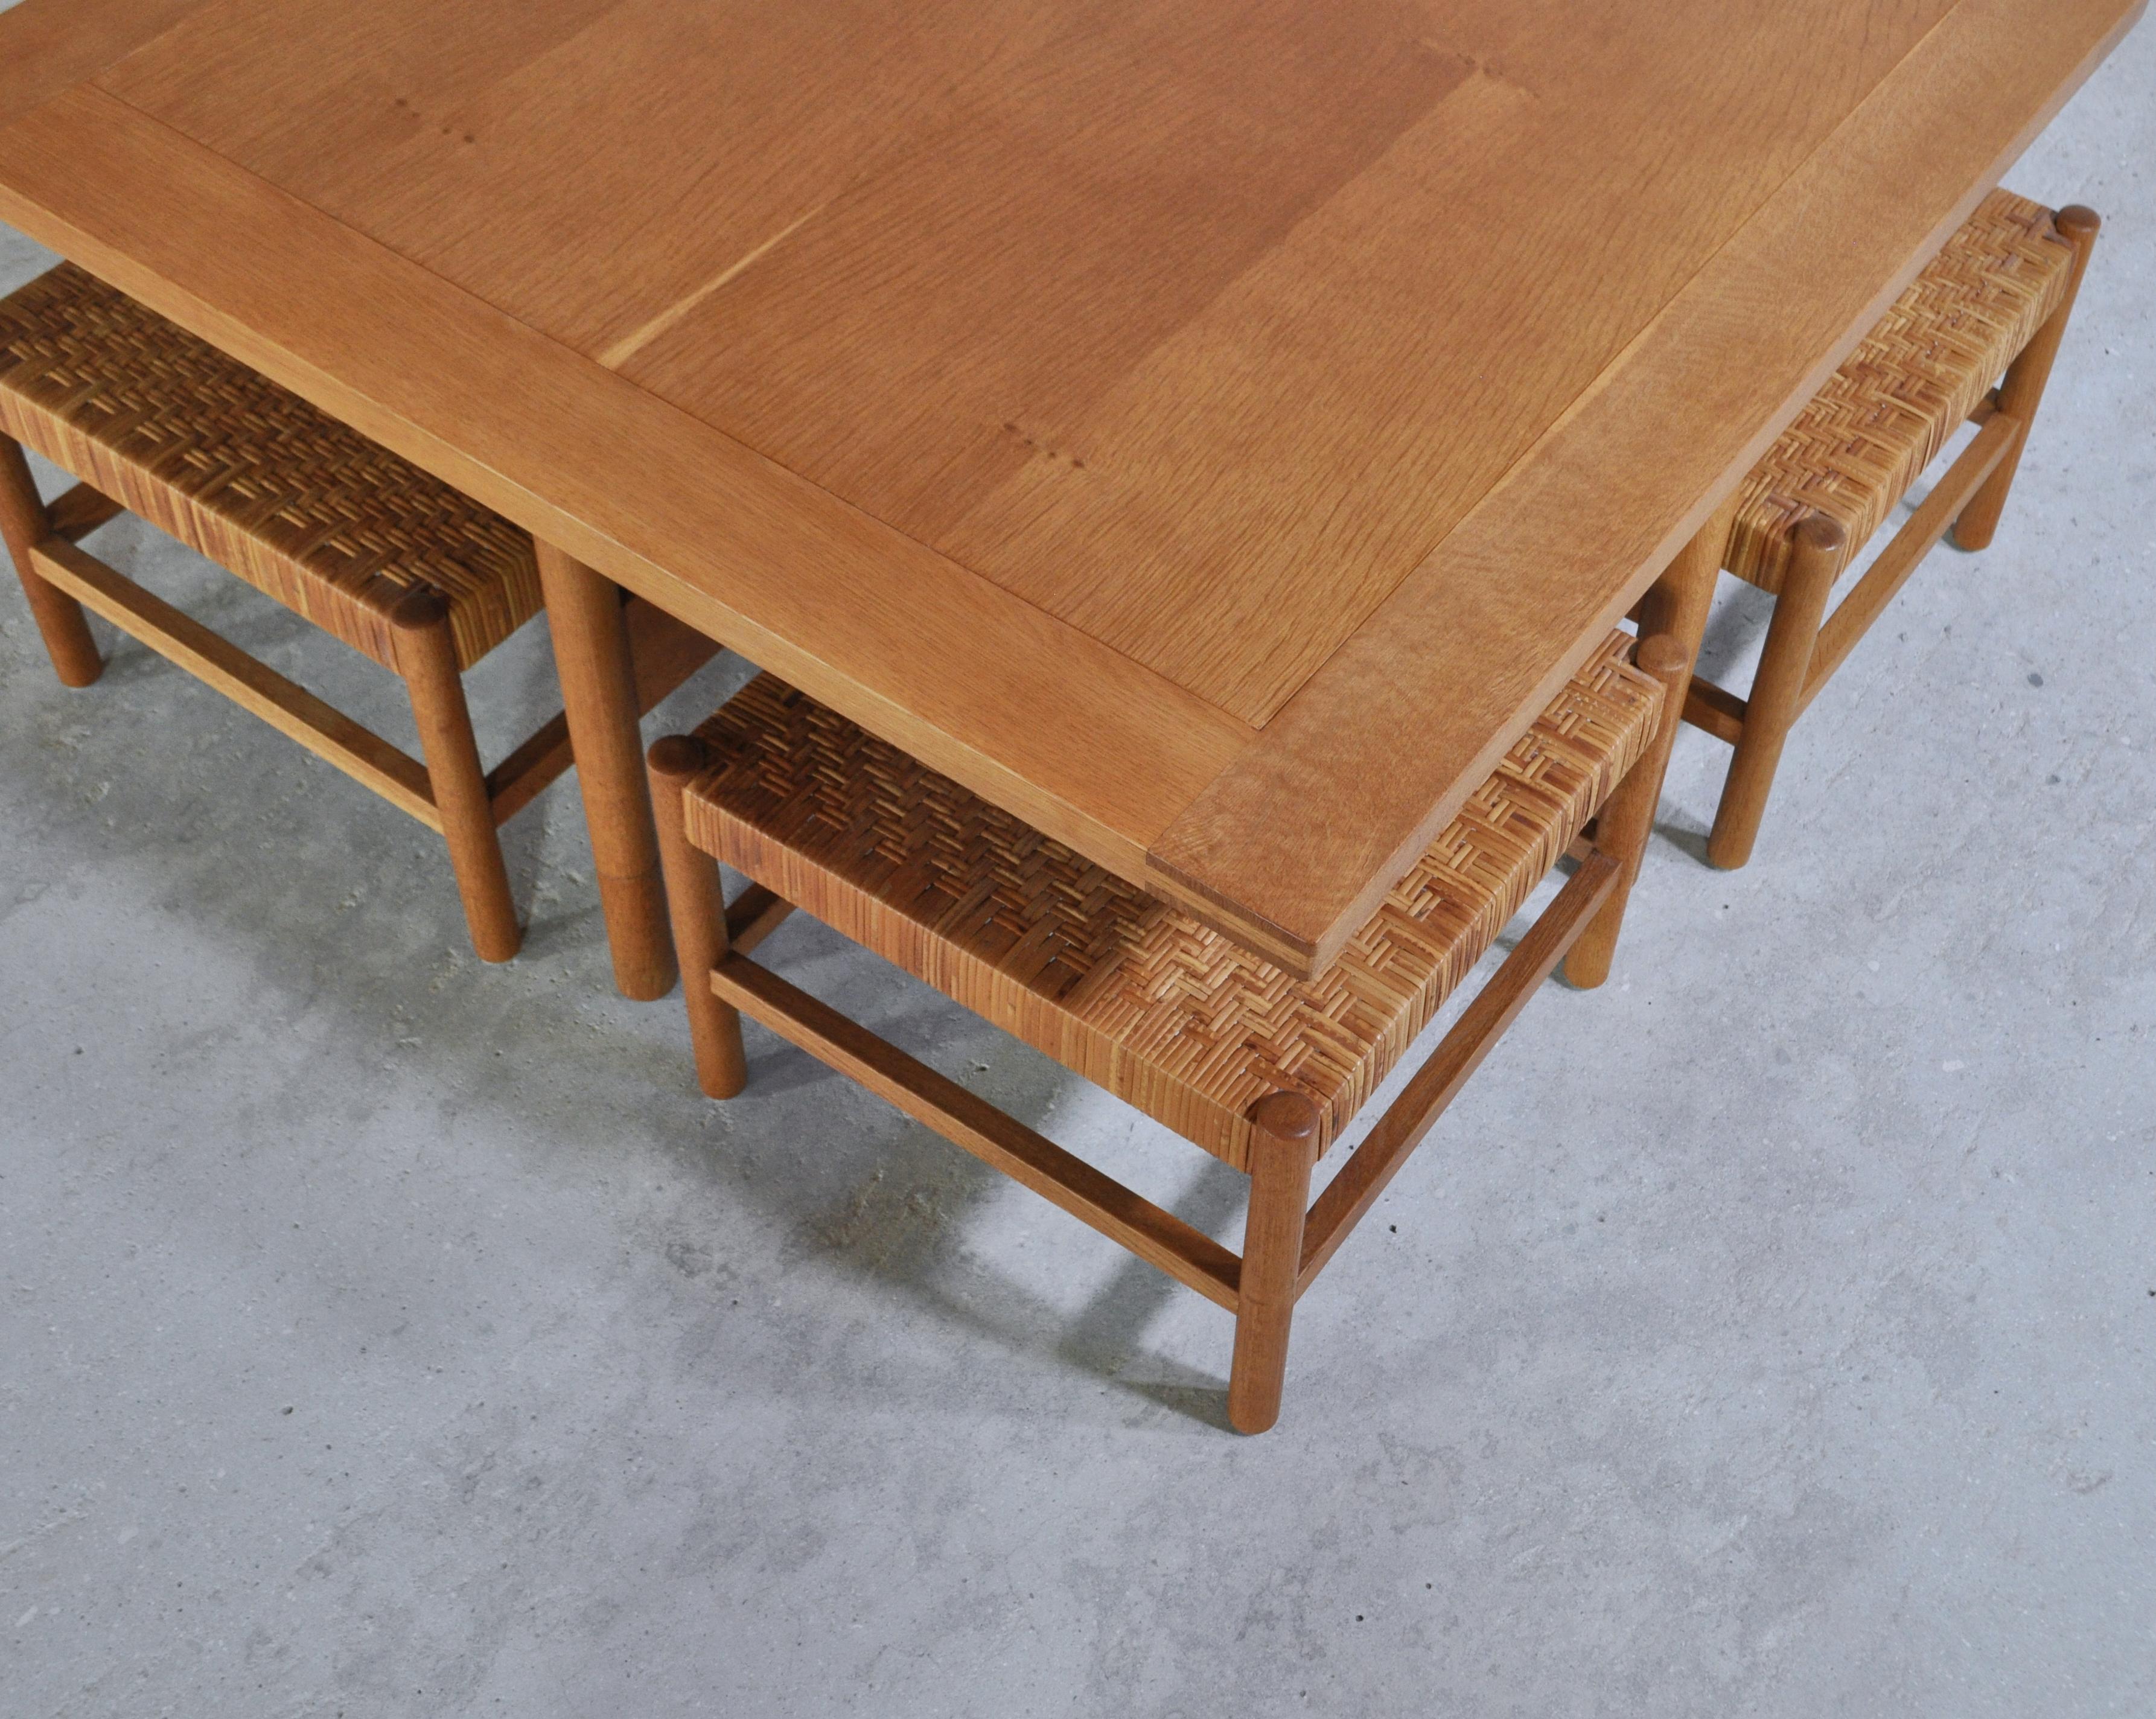 Mid-20th Century Oak & Cane Table and Stool Set by Axel Thygesen for Interna Danish Modern, 1950s